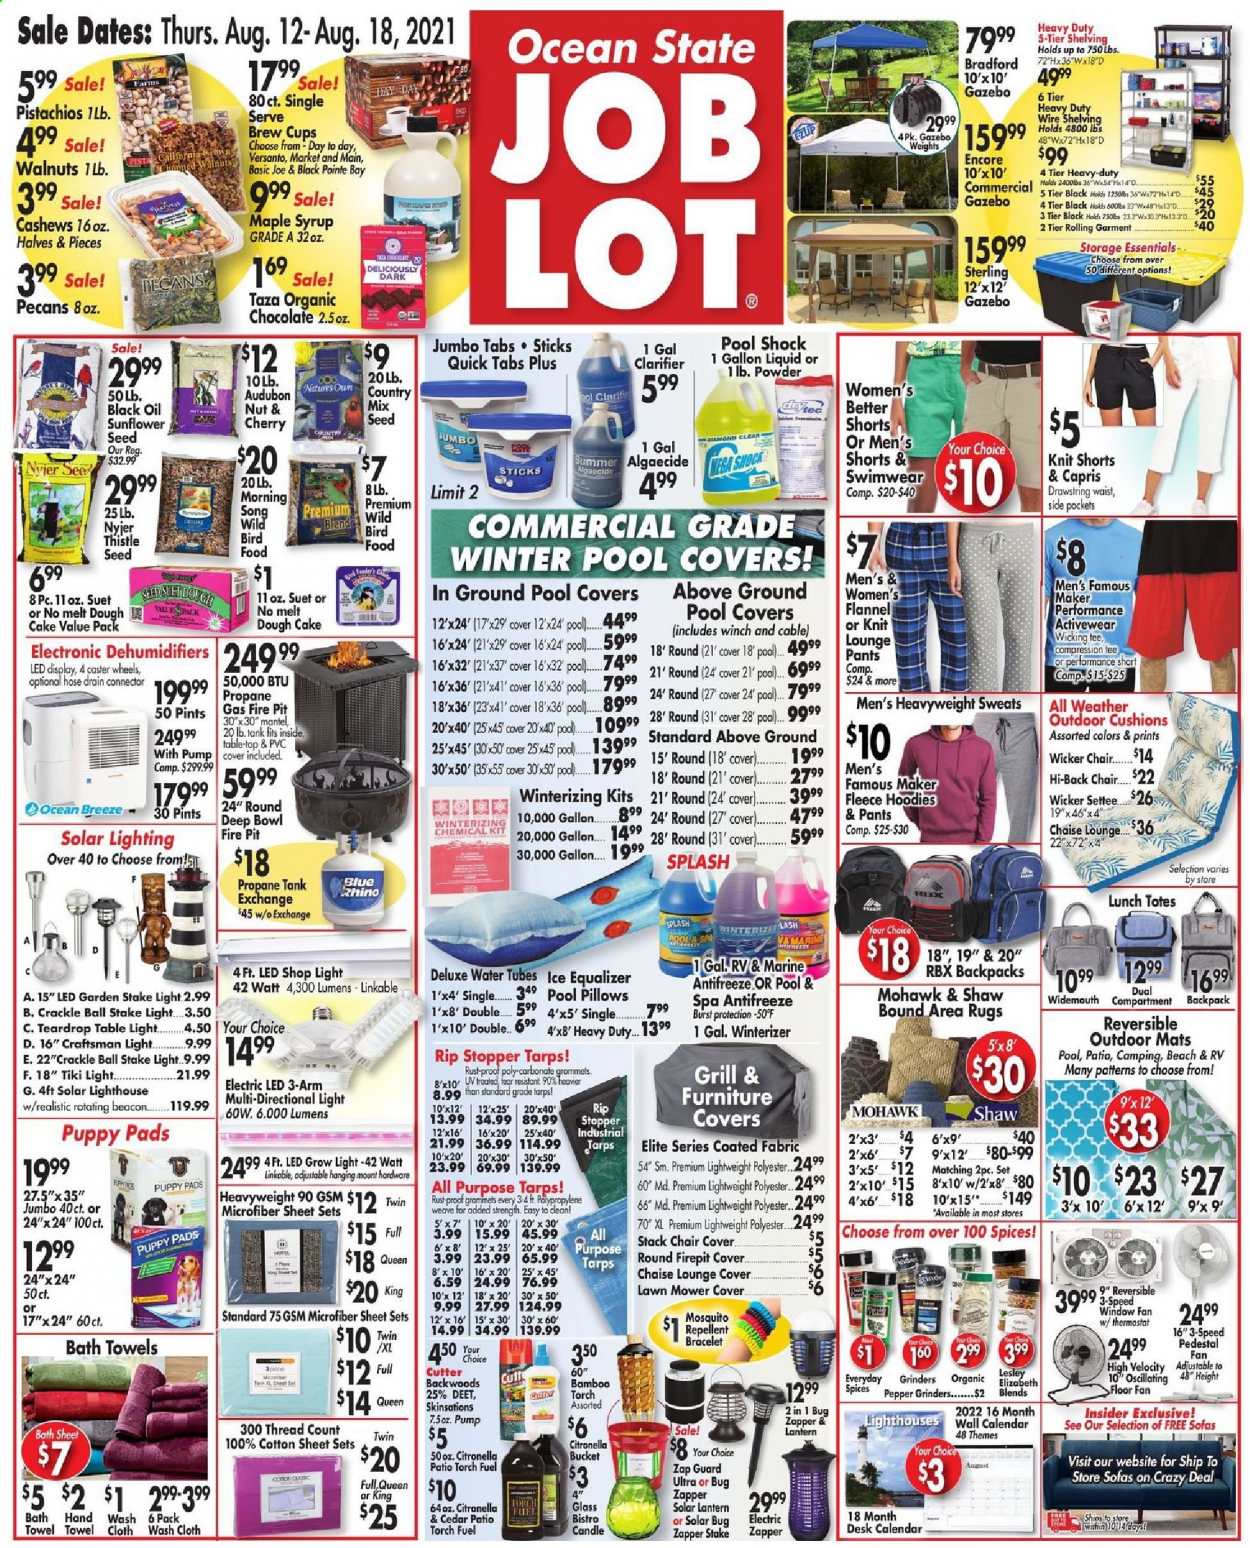 thumbnail - Ocean State Job Lot Flyer - 08/12/2021 - 08/18/2021 - Sales products - RBX, oil, Rin, hand wash, cup, candle, cushion, pillow, bath towel, towel, washcloth, tank, puppy pads, animal food, bird food, suet, plant seeds, stand fan, window fan, tote, lantern, shorts, pants, hoodie, swimming suit, torch, tarps, shop light, rug, area rug, Craftsman, lawn mower, propane tank, gazebo, grill, fire bowl, pool, pump, garden stake, antifreeze. Page 1.